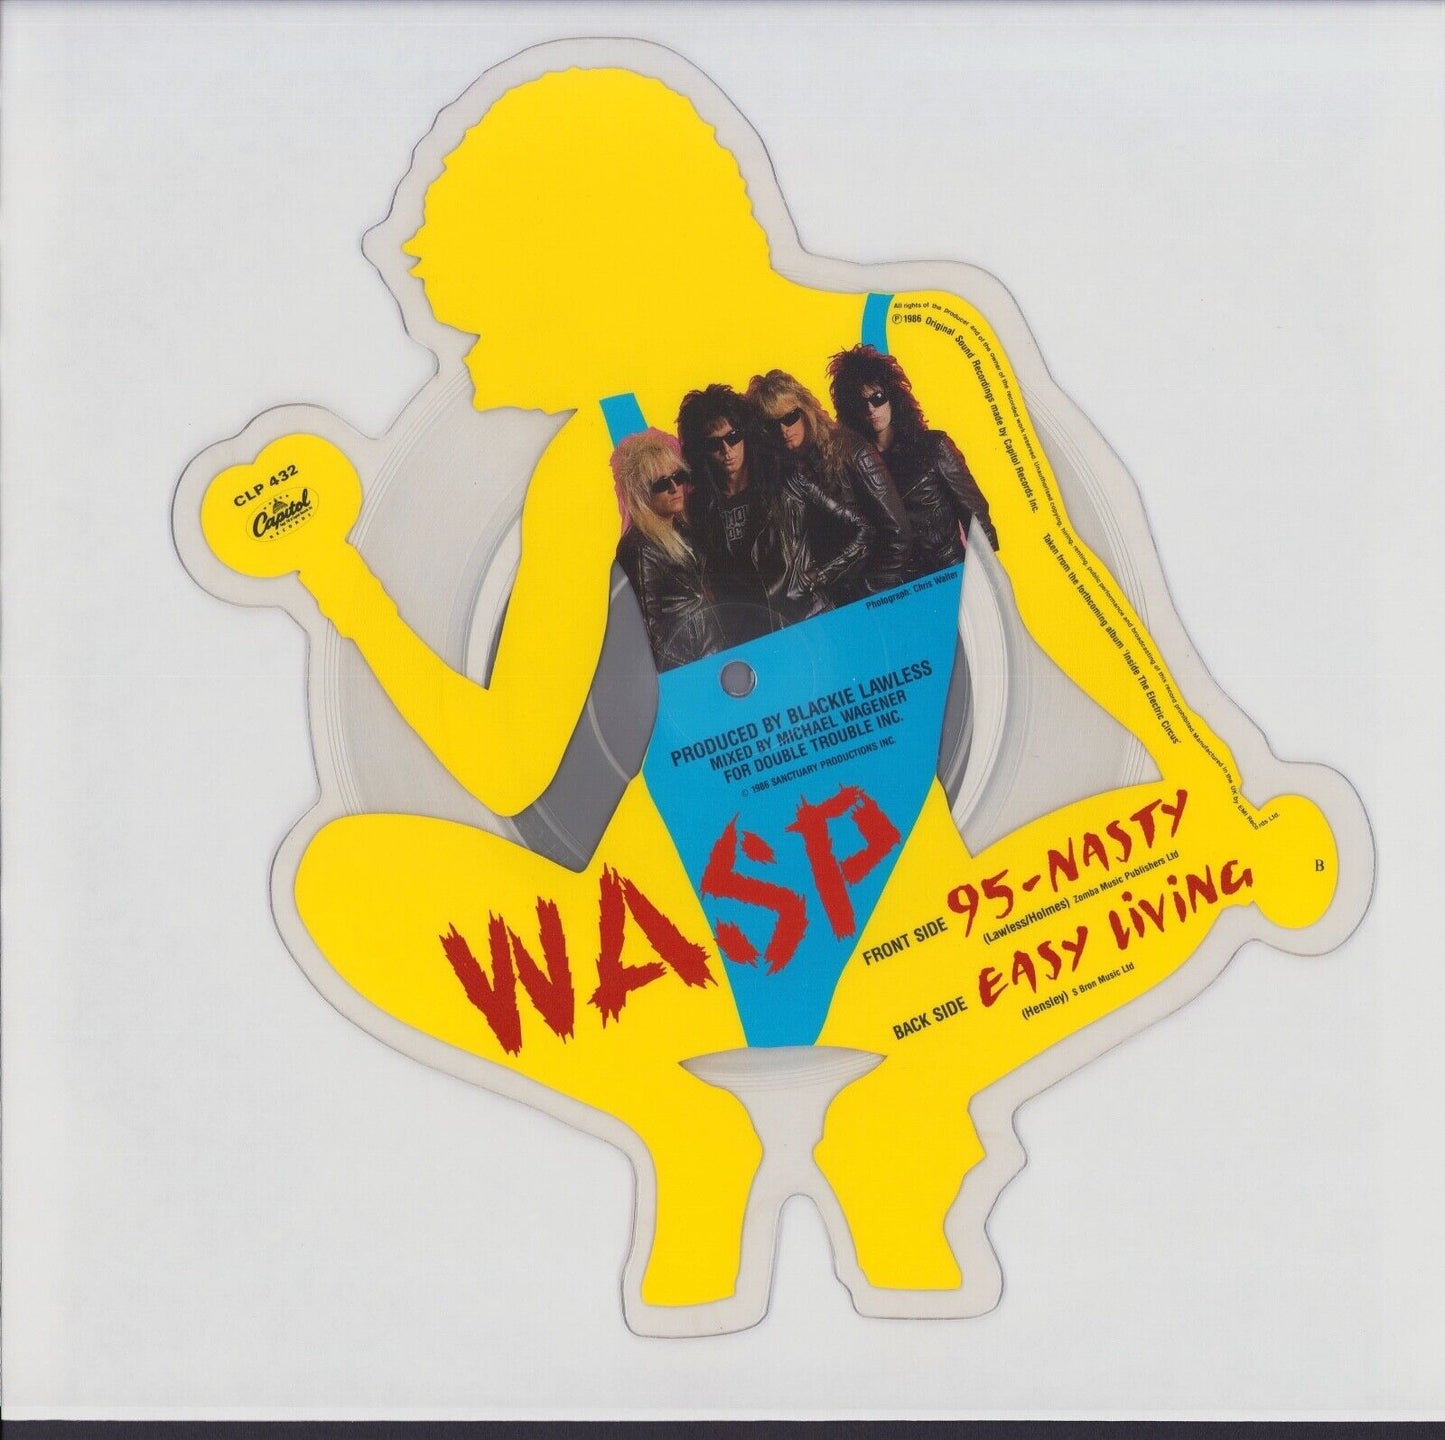 WASP - 95-Nasty Vinyl Picture Disc 7" Limited Edition